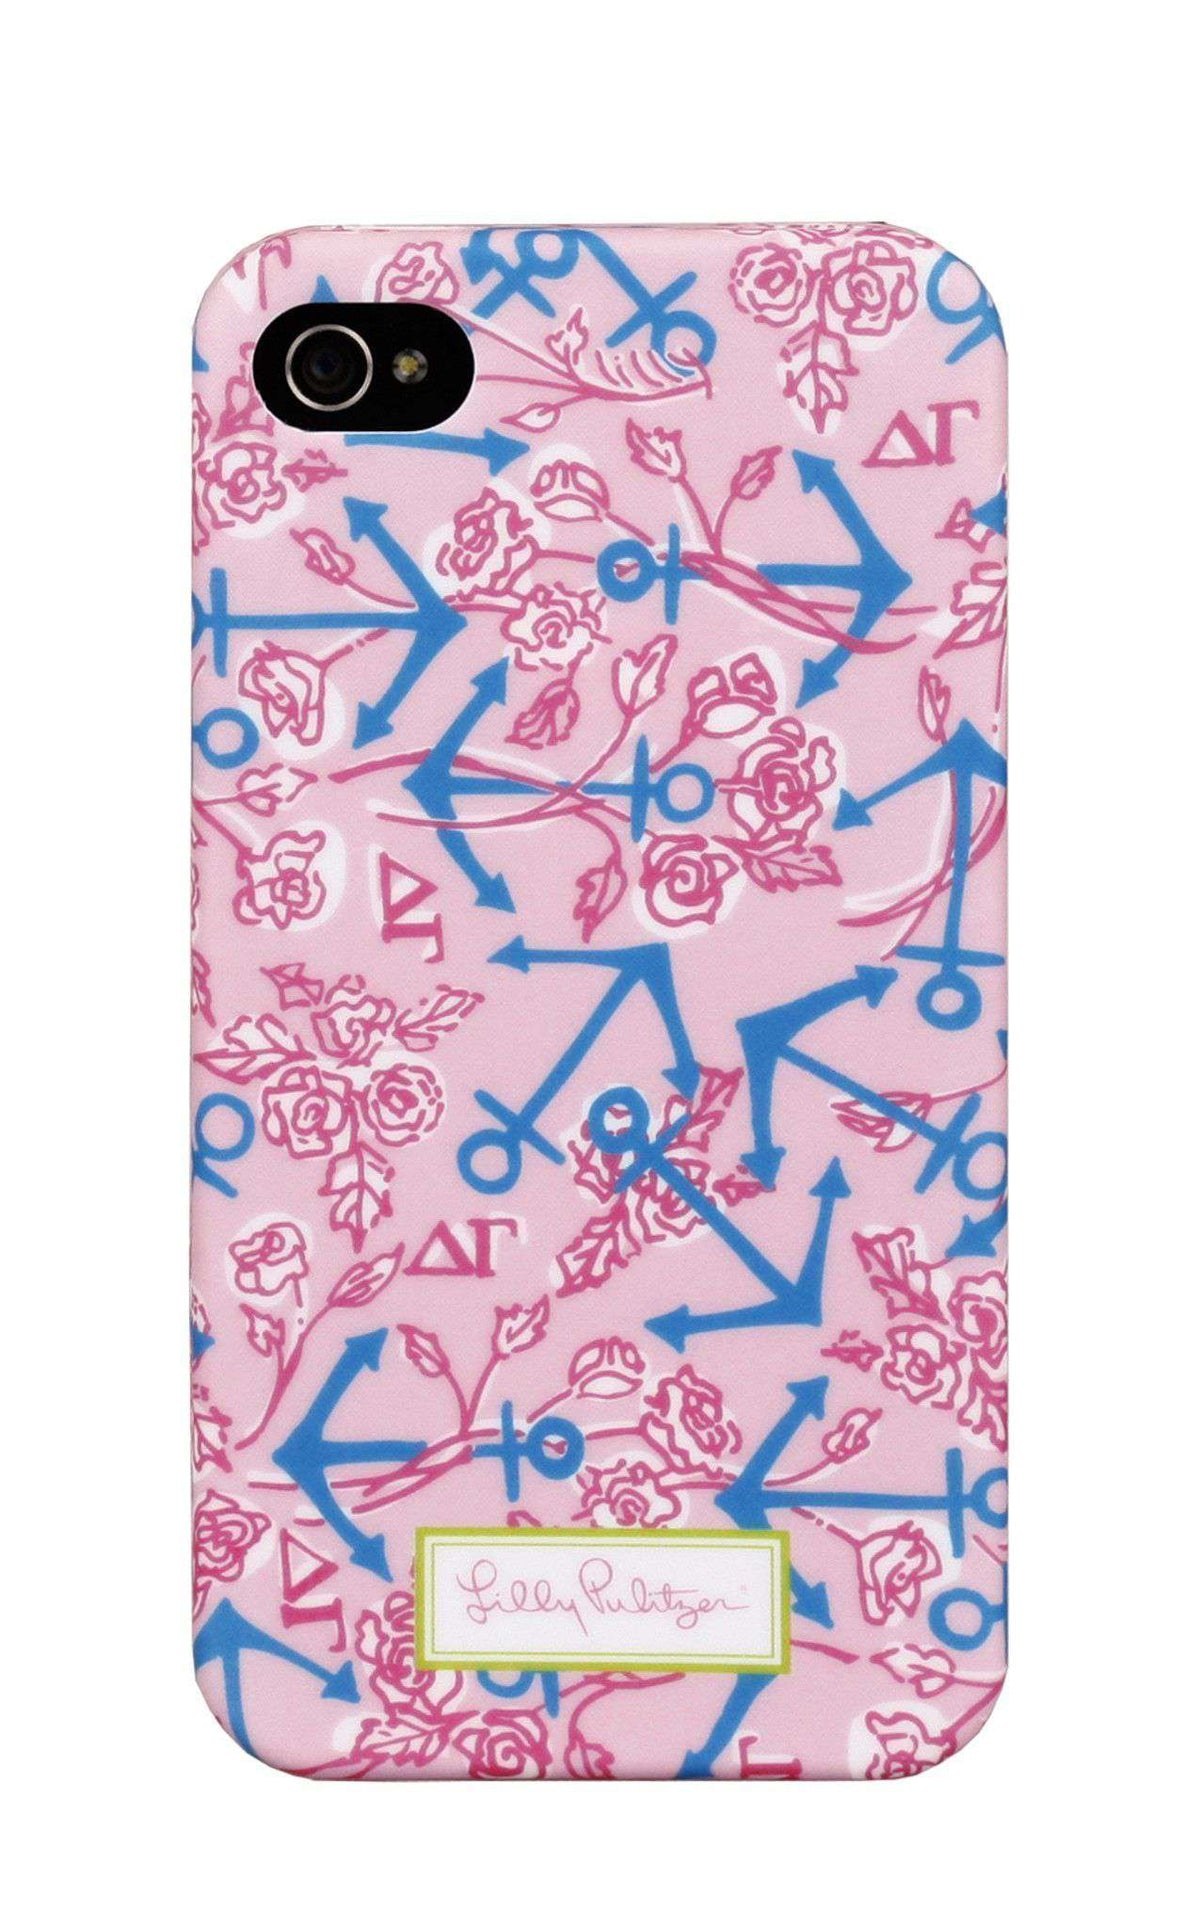 Delta Gamma iPhone 4/4s Cover by Lilly Pulitzer - Country Club Prep